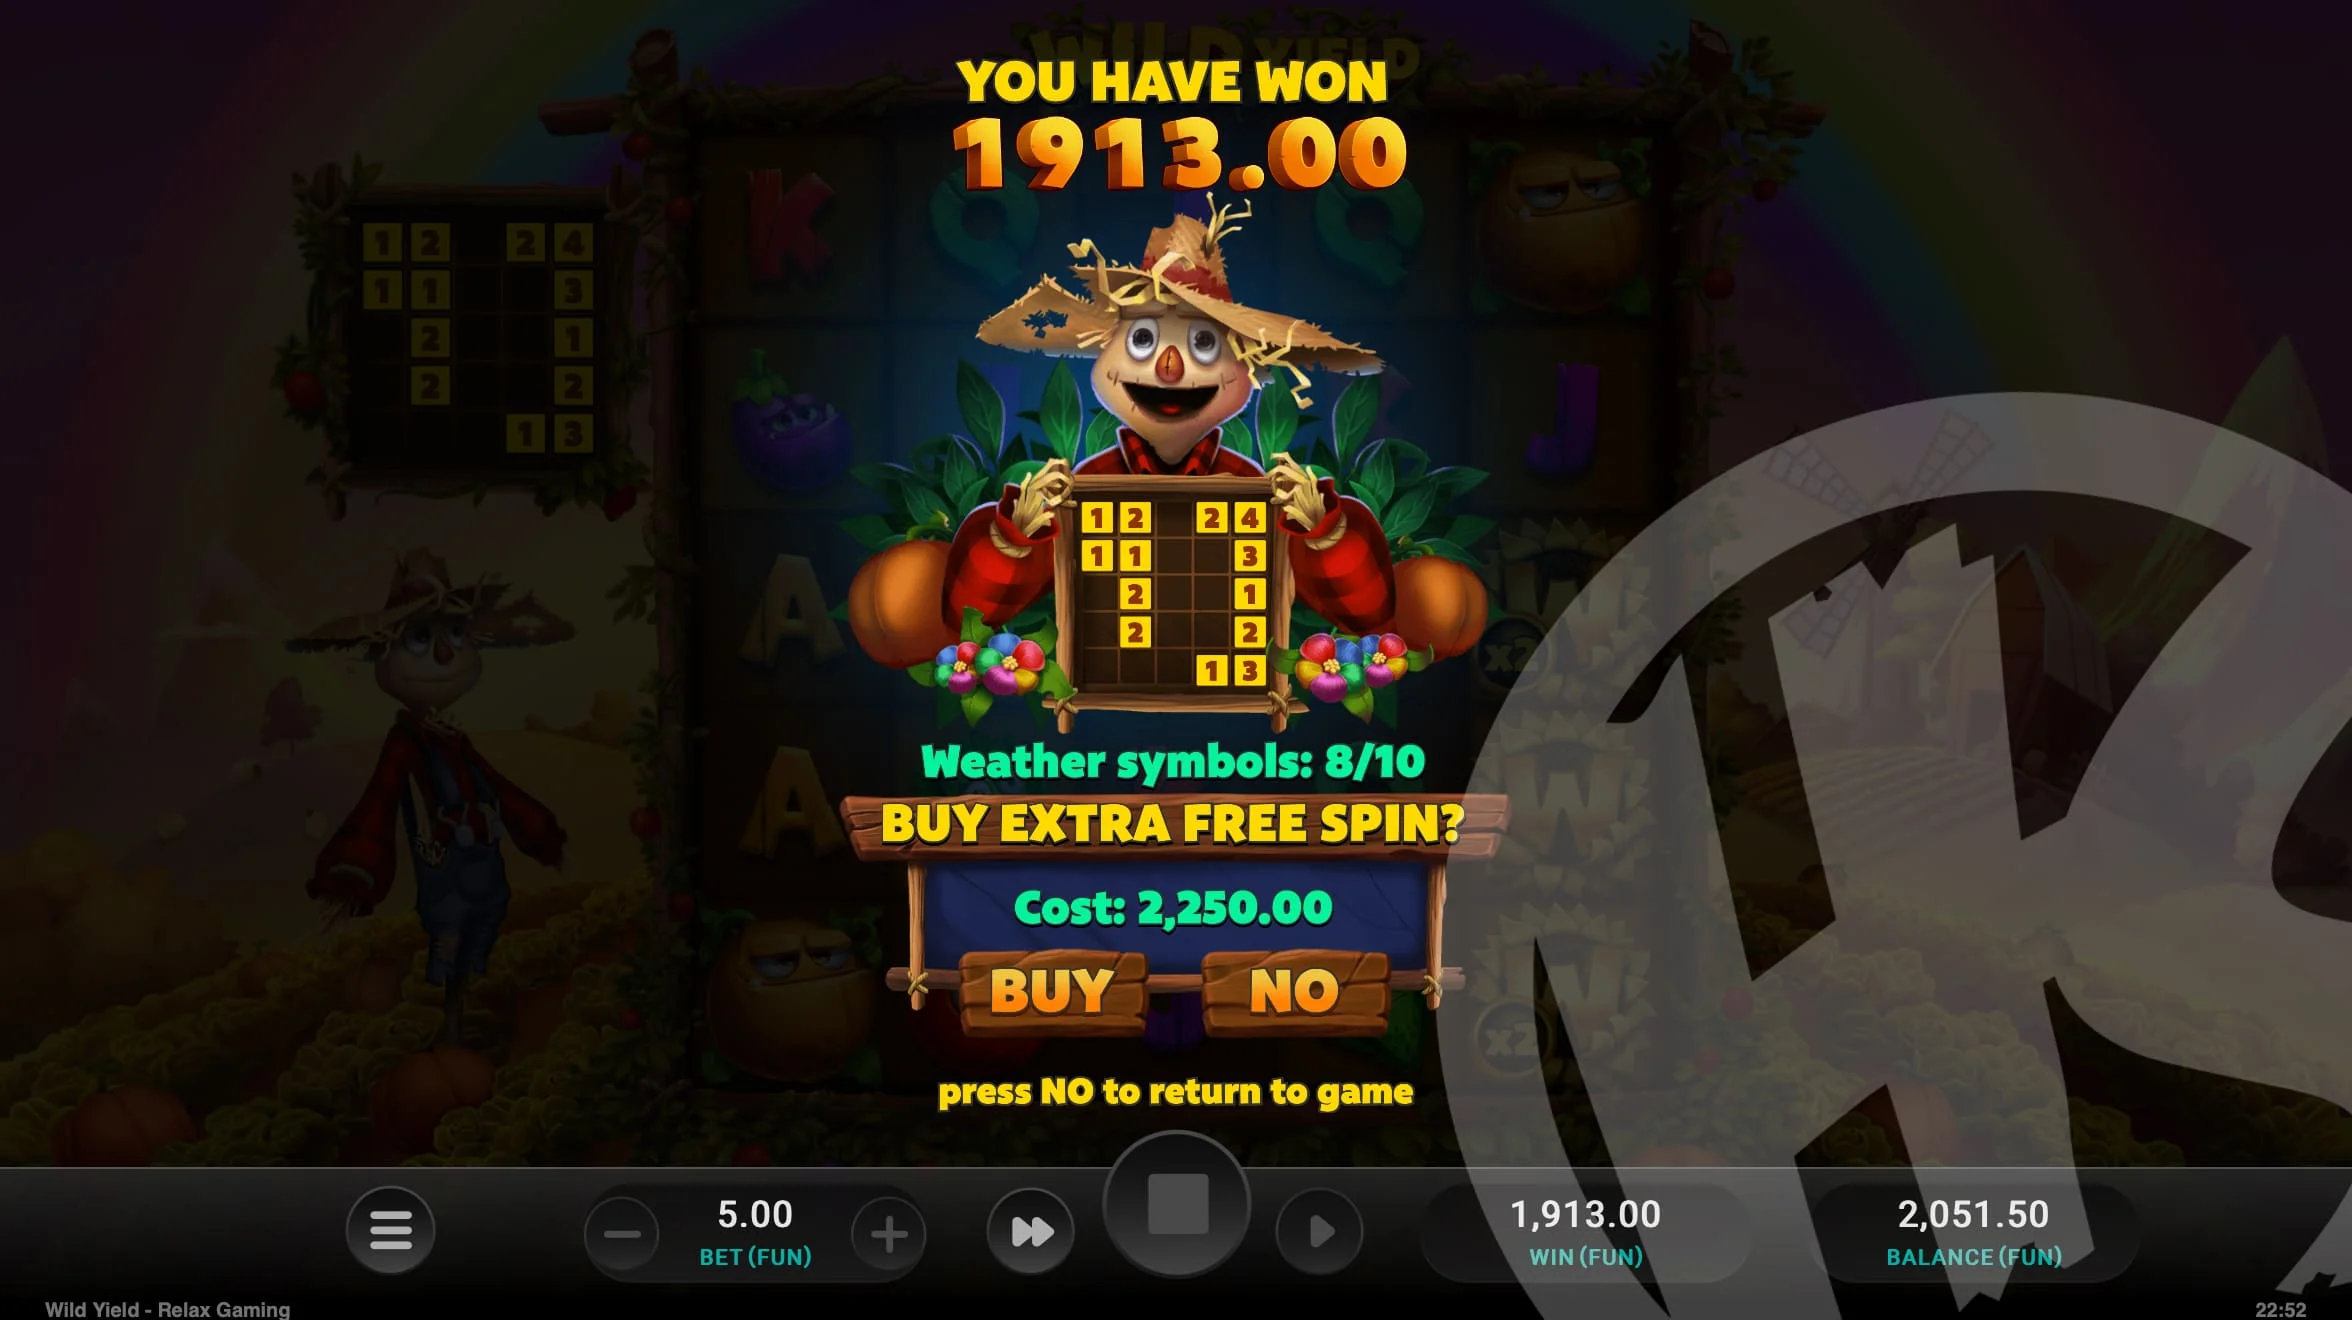 If Less Than 10 Weather Symbols Have Landed, 1 Extra Free Spin Can Be Bought 